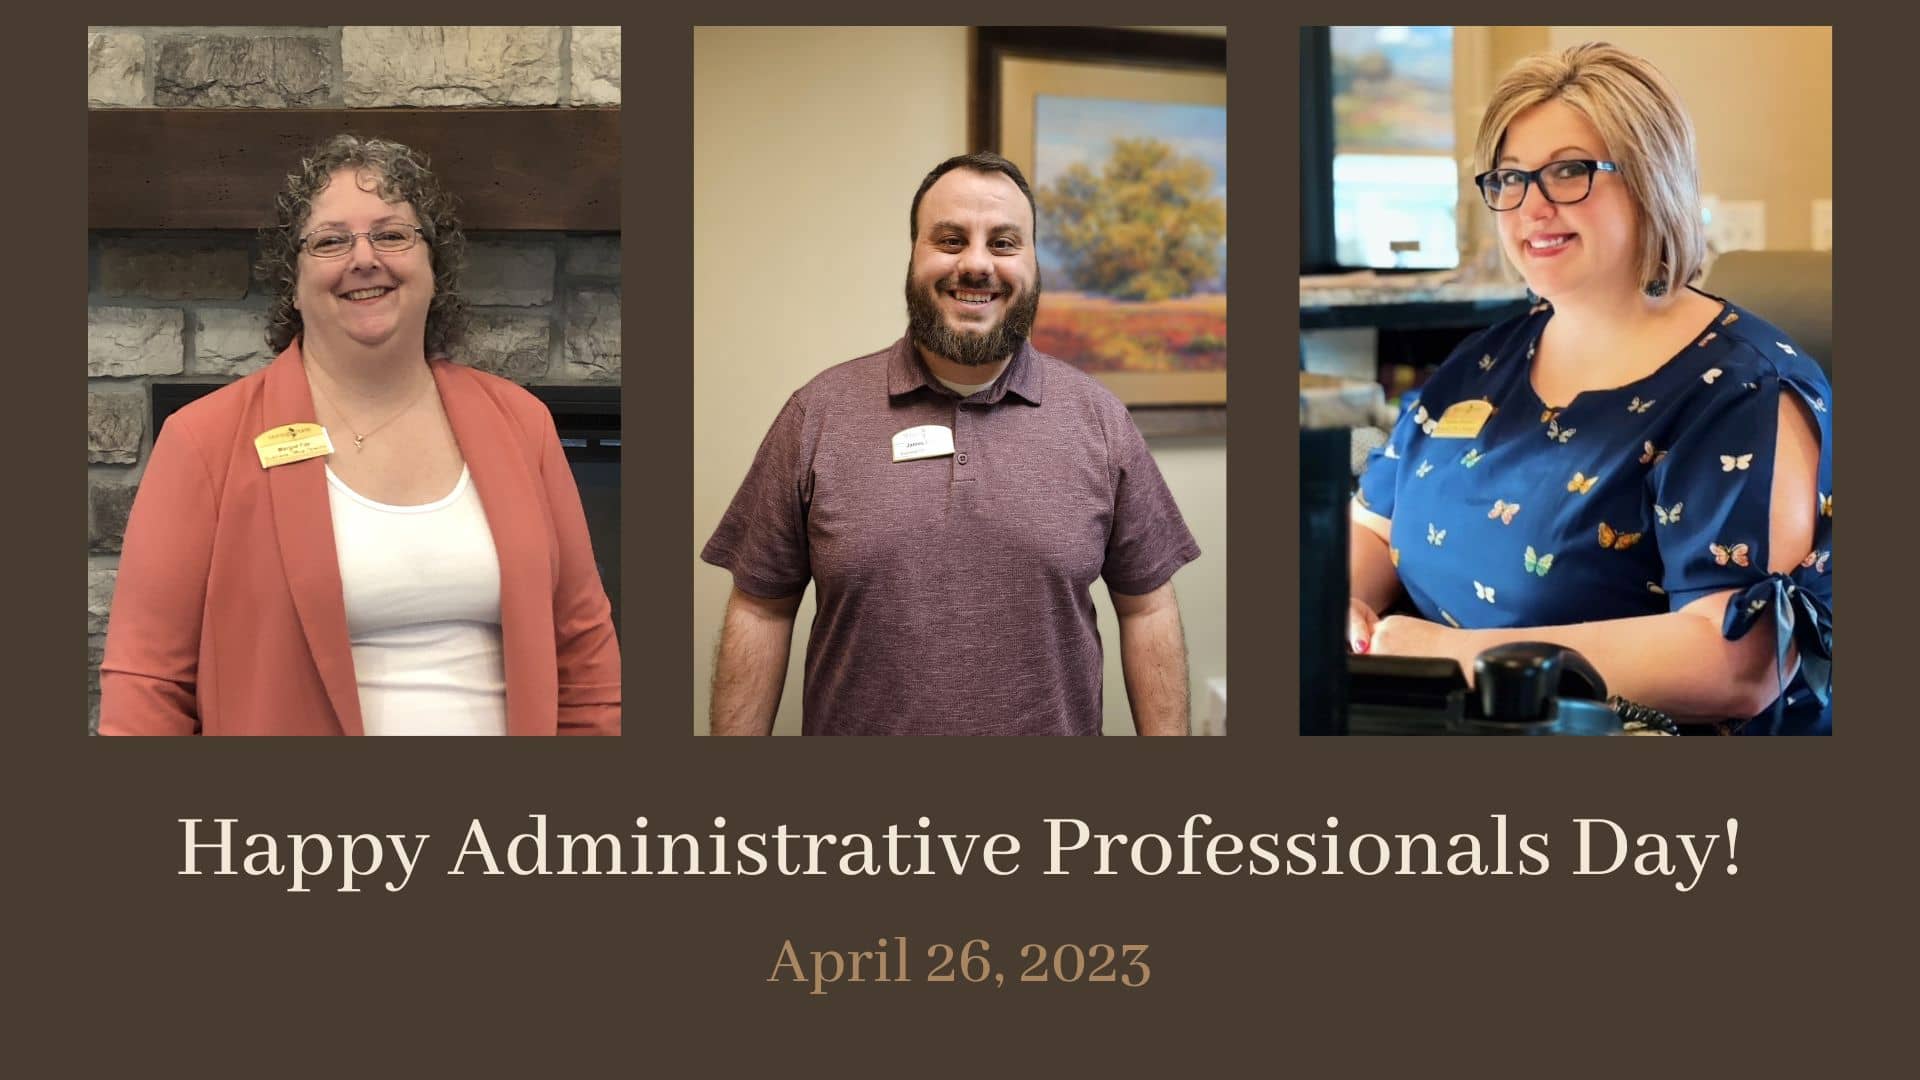 Administrative Professionals Day image